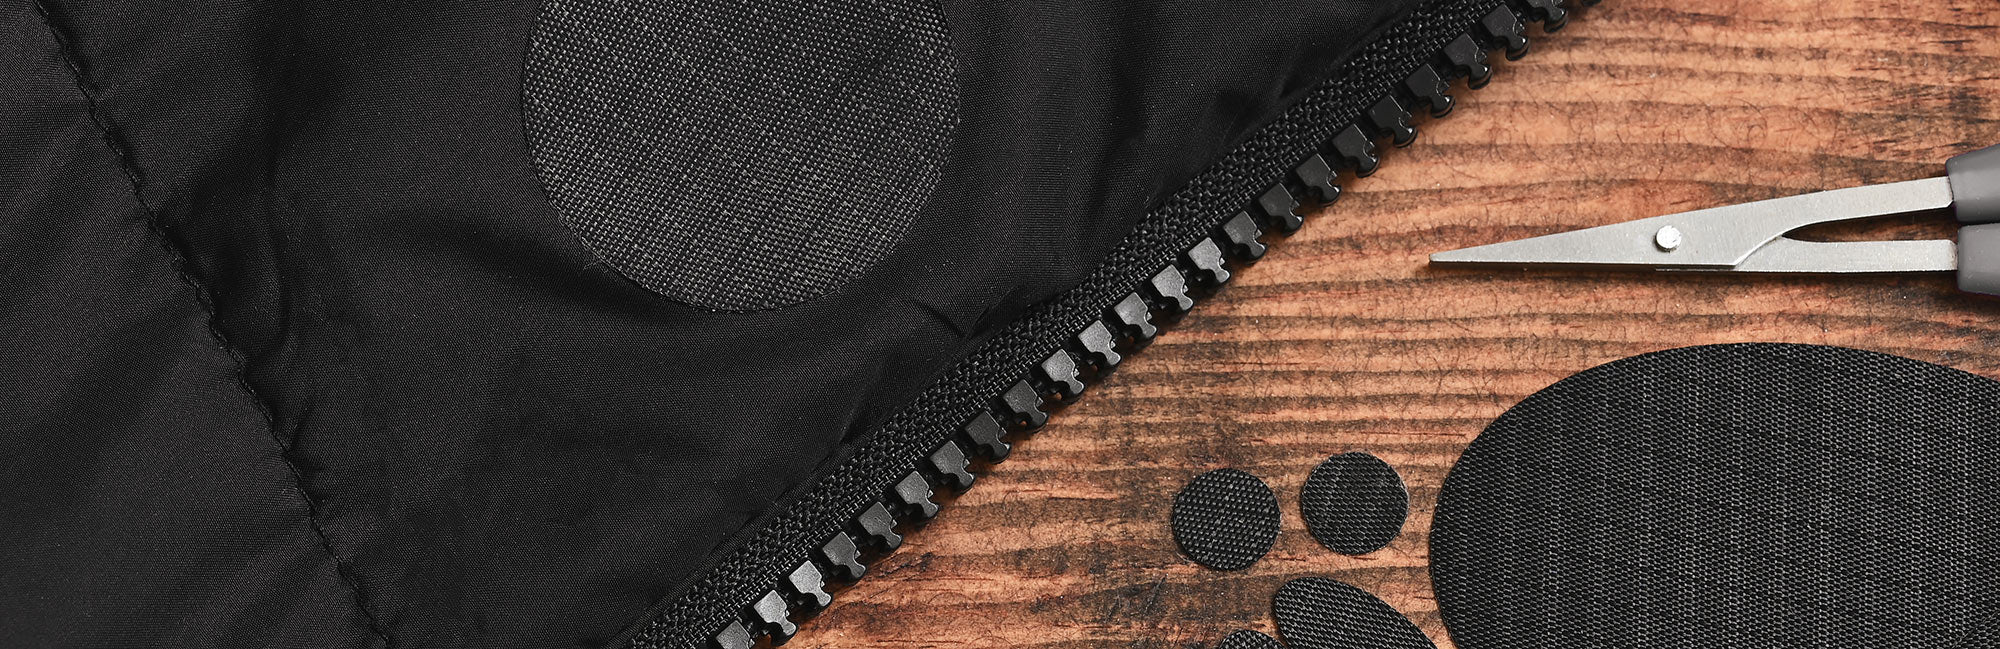 A Quick and Effective Way to Repair a Down Jacket - aZengear